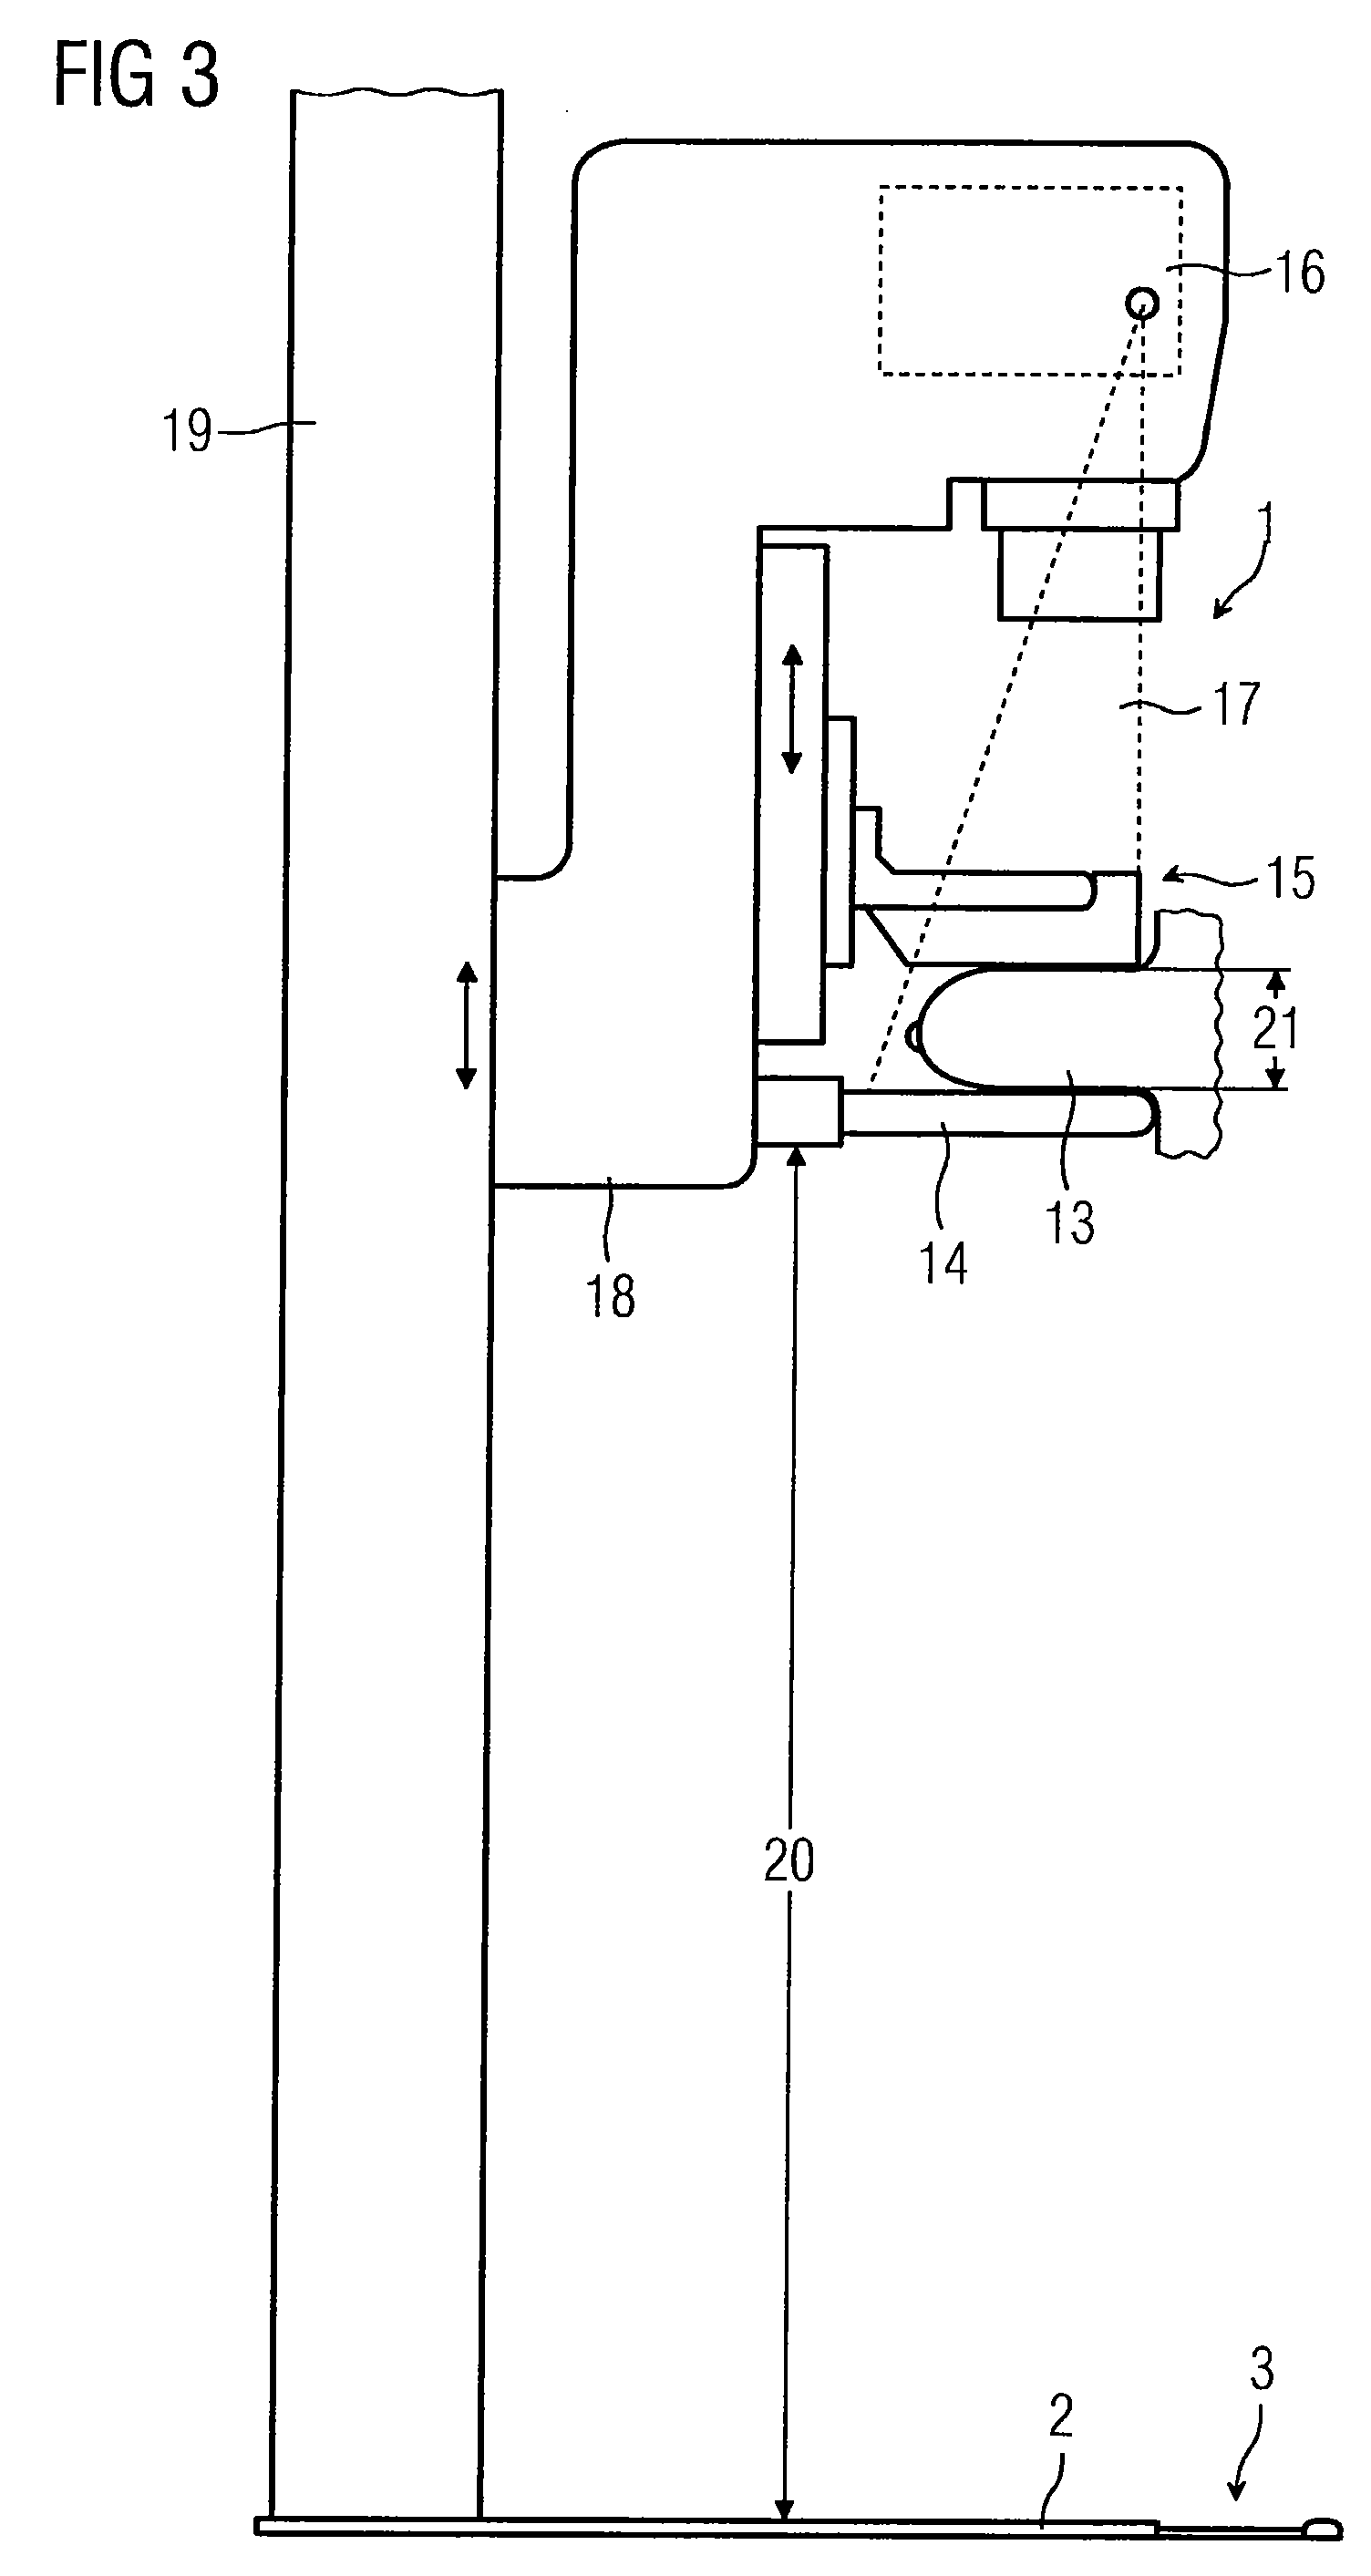 User control device for controlling a medical system